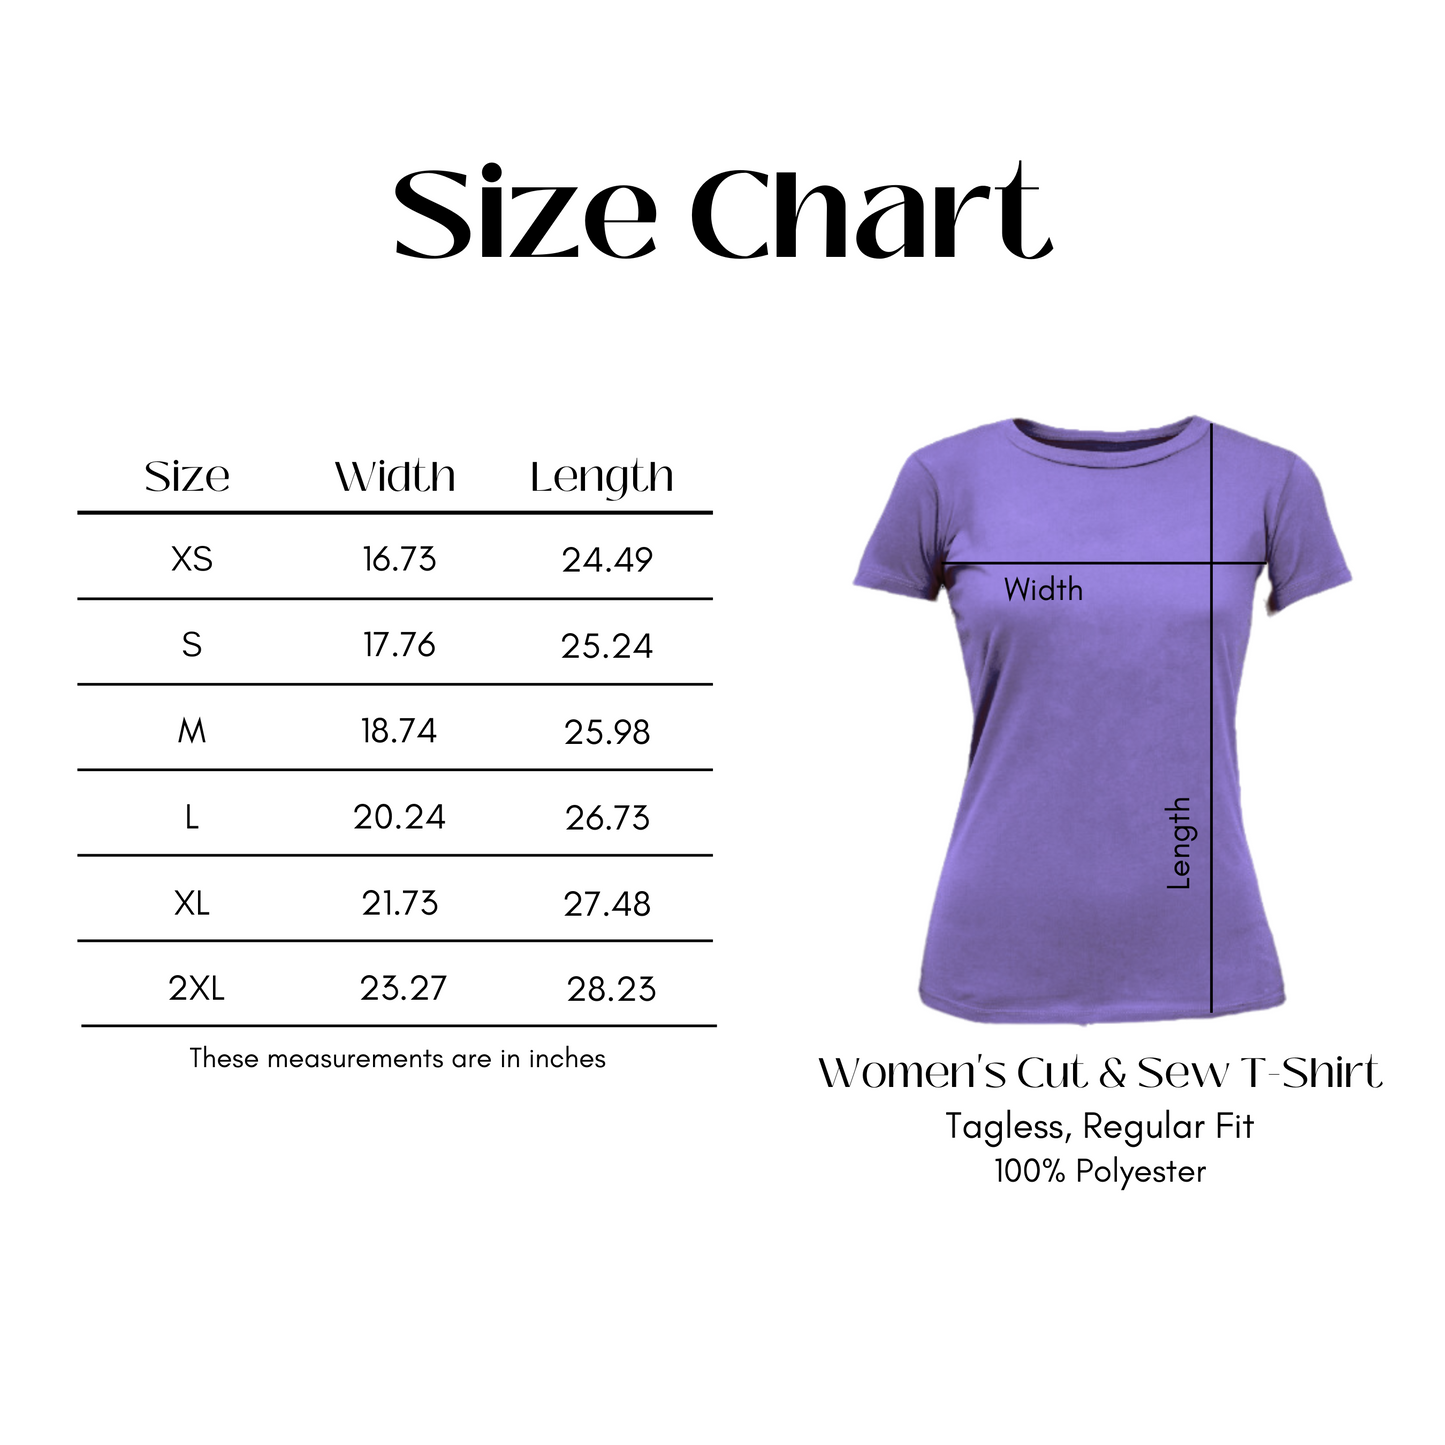 the size chart for a women's t - shirt